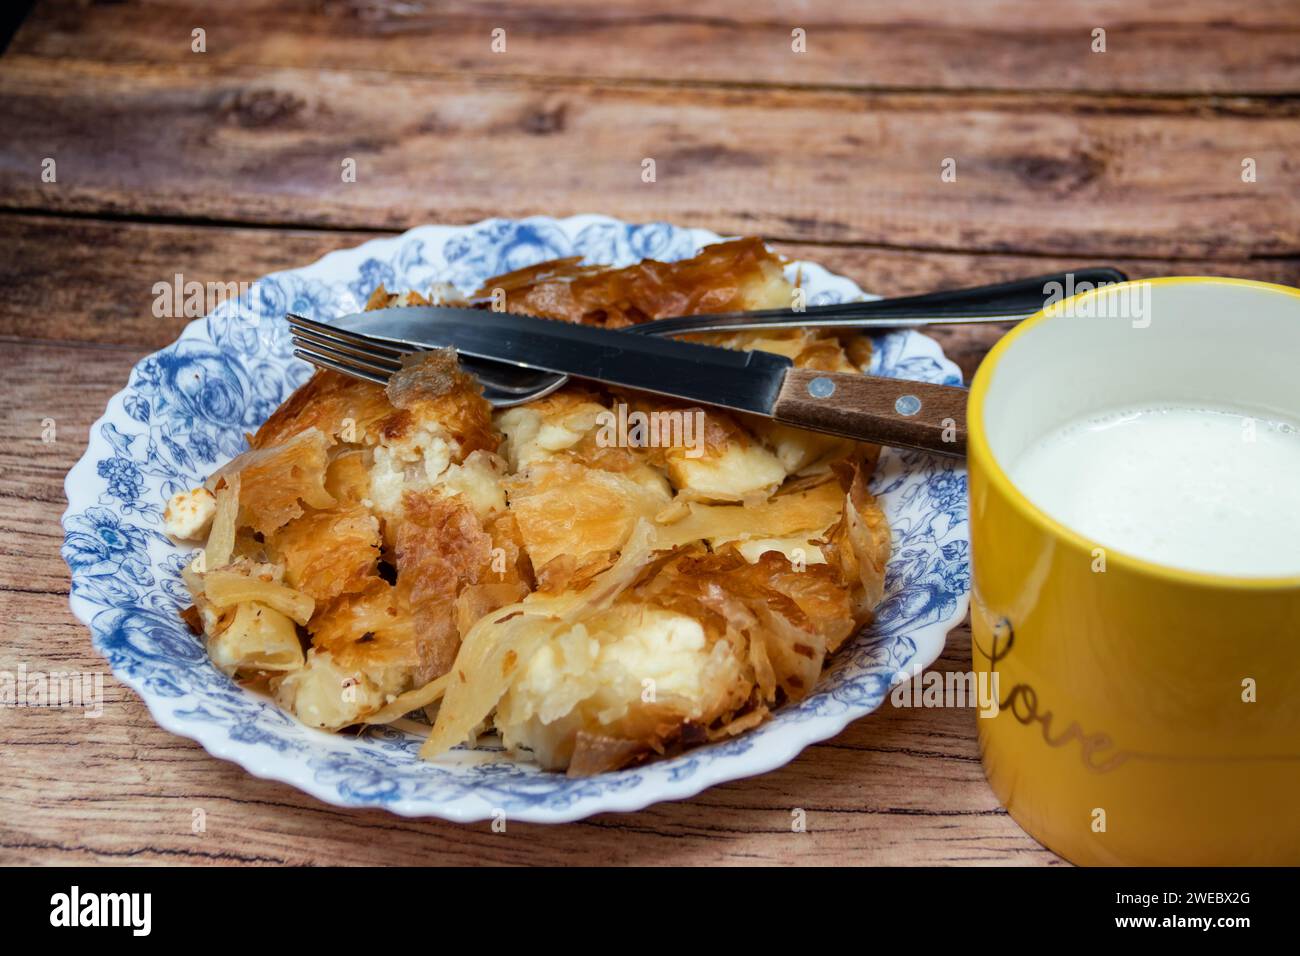 Serbian dish called Burek (cheese pie) served for breakfast at the plate with cutlery and fresh home made yogurt in cup Stock Photo